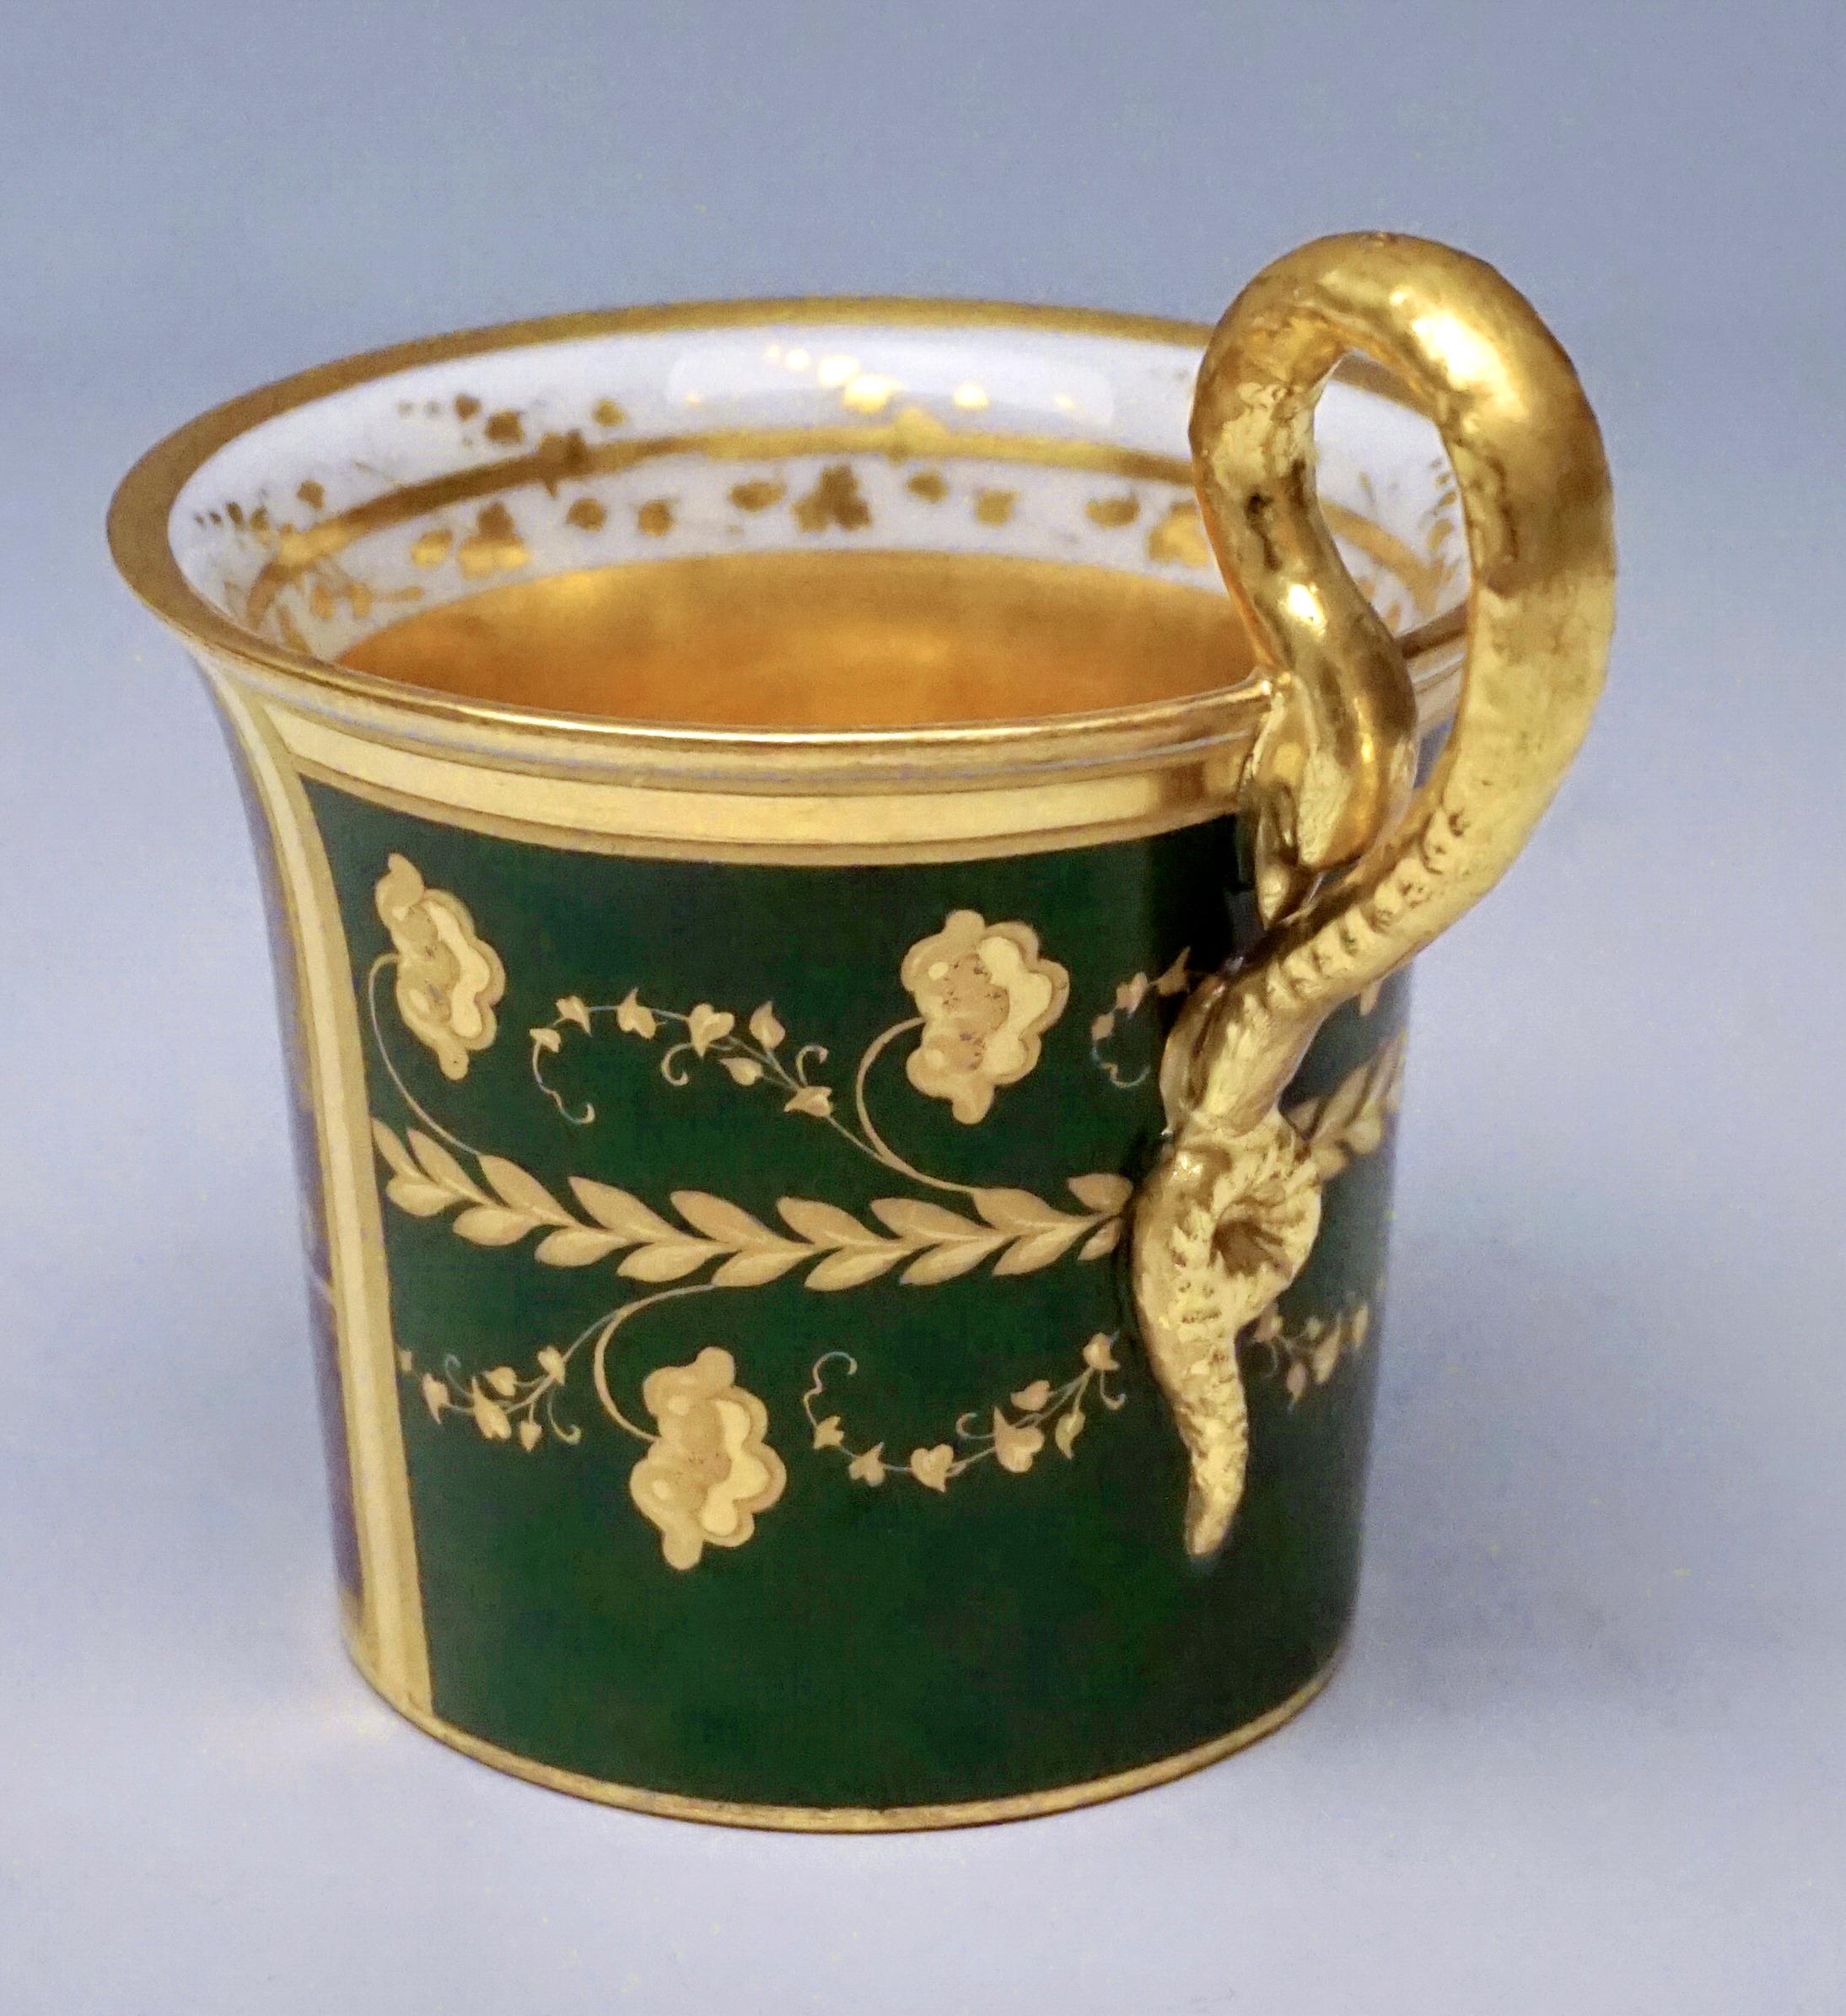 Austrian Vienna Imperial Porcelain Cup with Saucer Gold and Green Hand Painted 1827